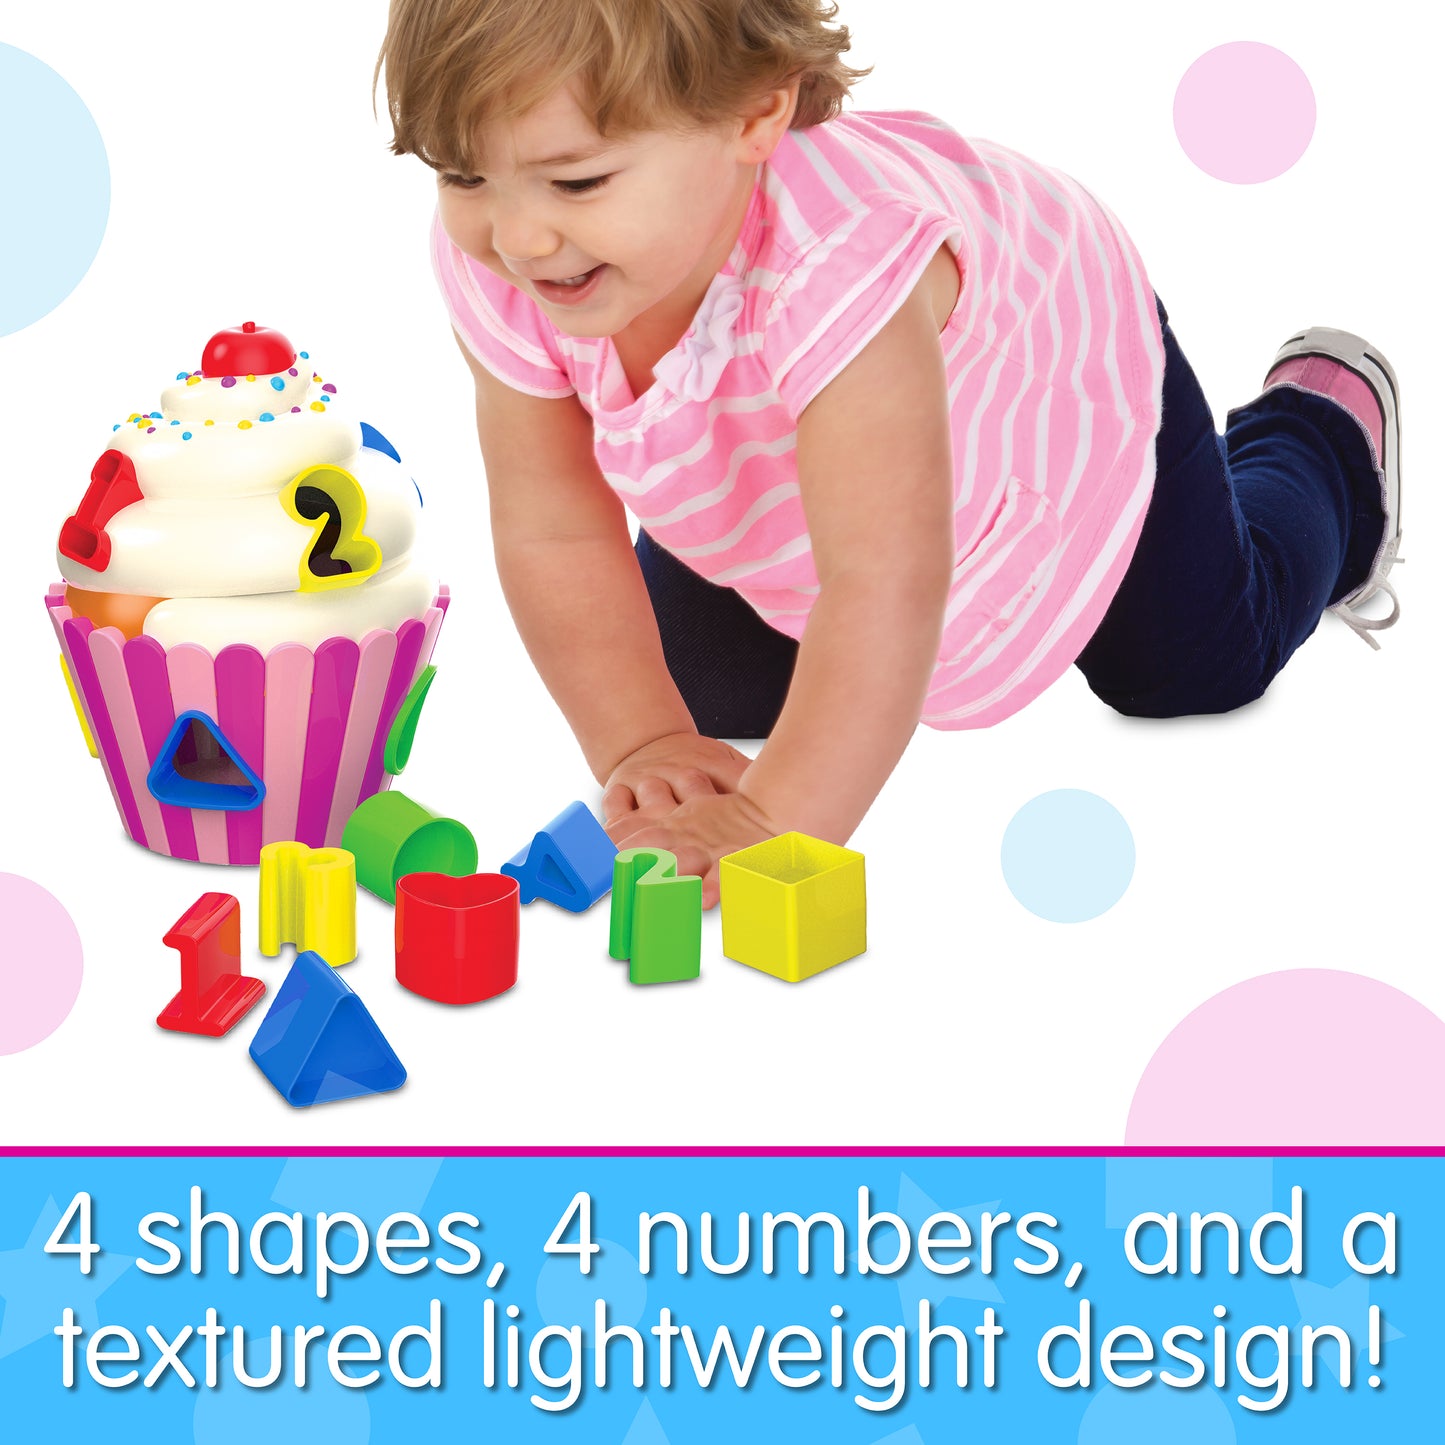 Infographic of young girl playing with Cupcake Shape Sorter that reads, "4 shapes, 4 numbers, and a textured lightweight design!"